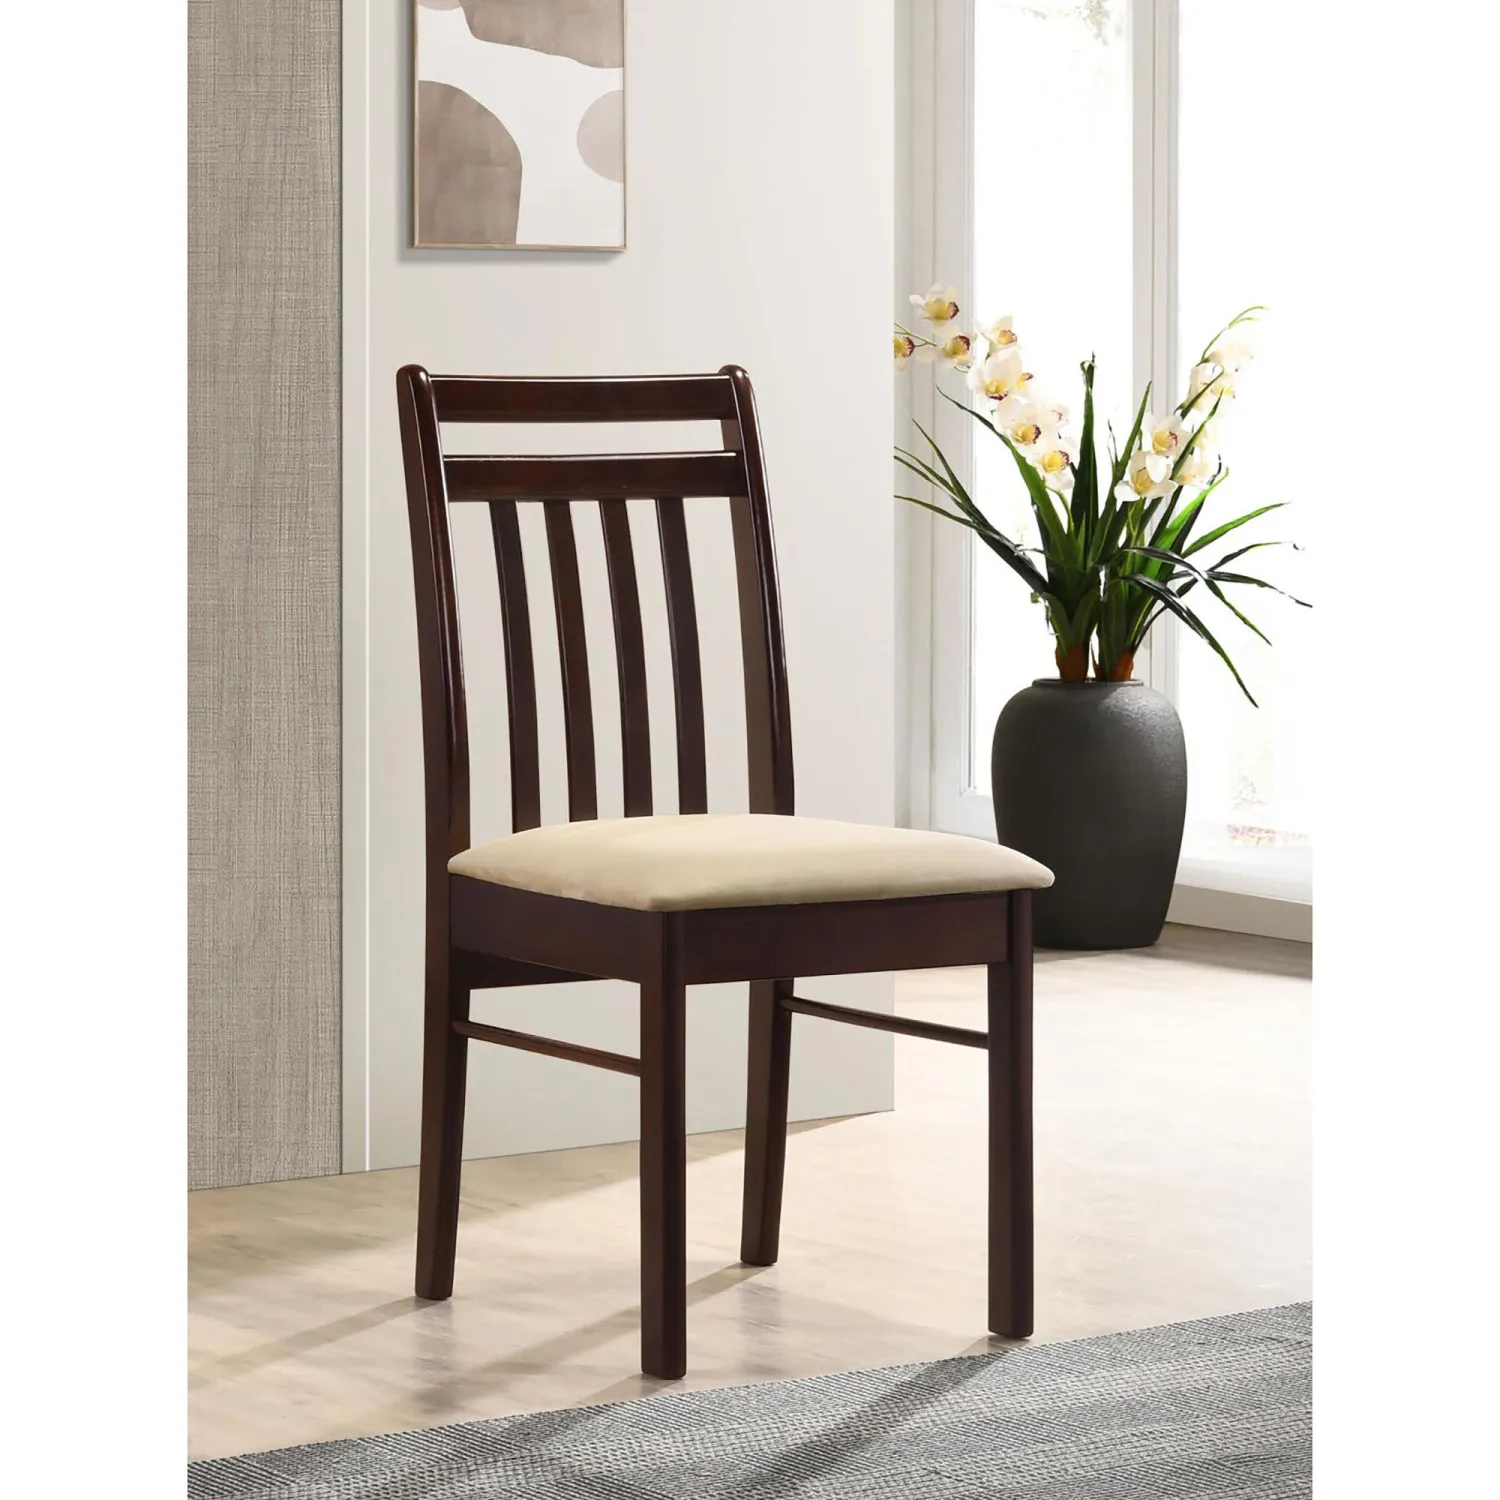 

Elegant Light Brown and Cappuccino Slat Back Desk Chair for Stylish Comfort and Support in Home or Office Settings.